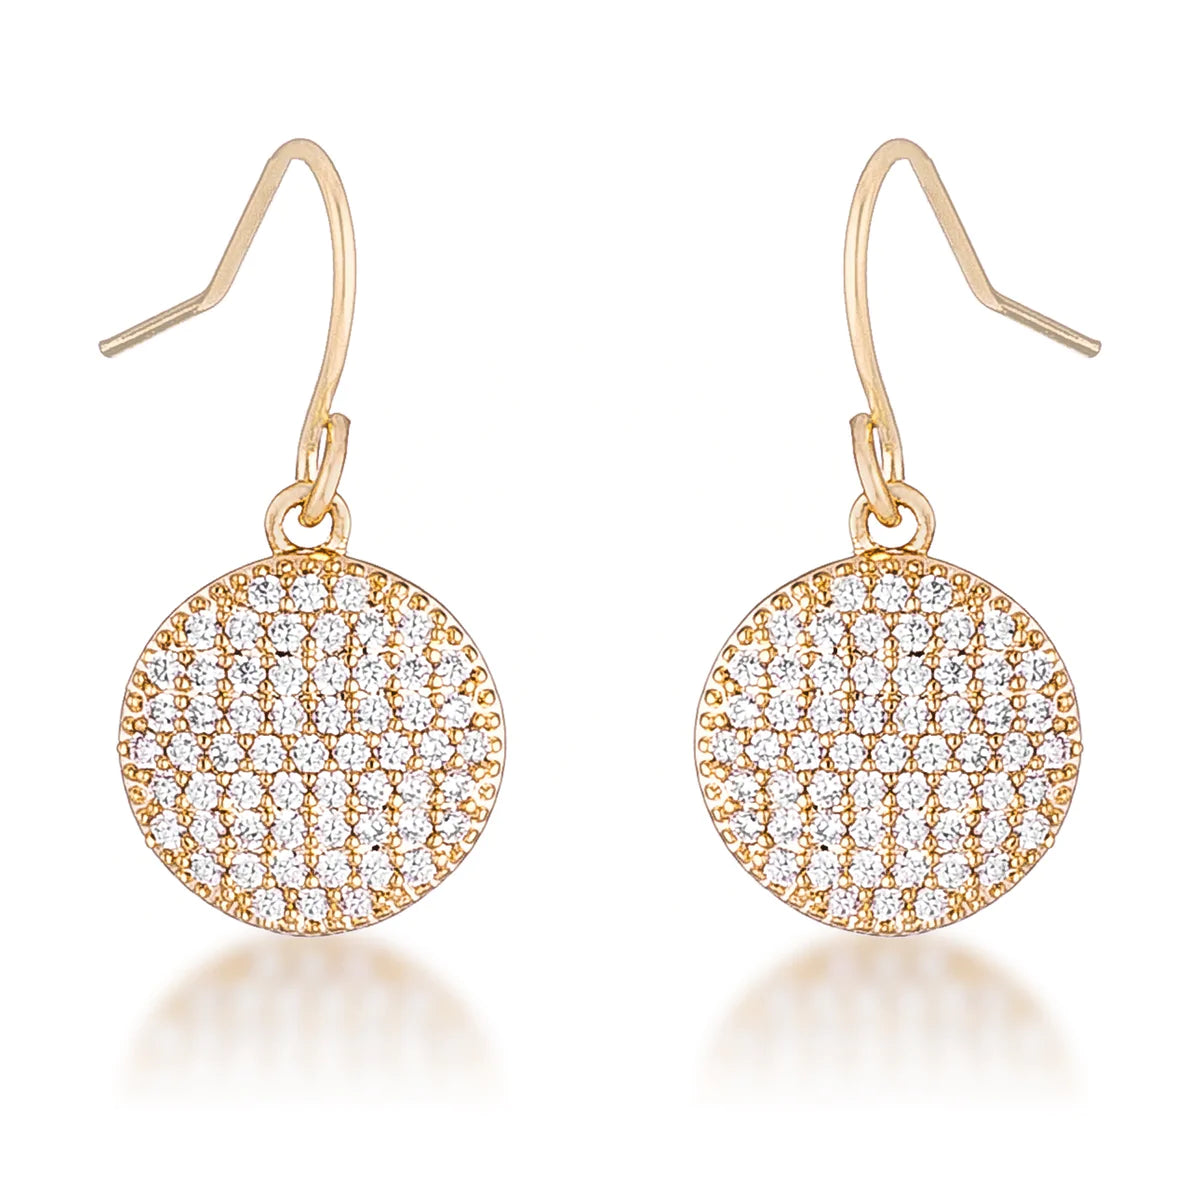 USA IMPORT .6 Ct Elegant CZ Gold Plated Disk Earrings LS E50188G-C01